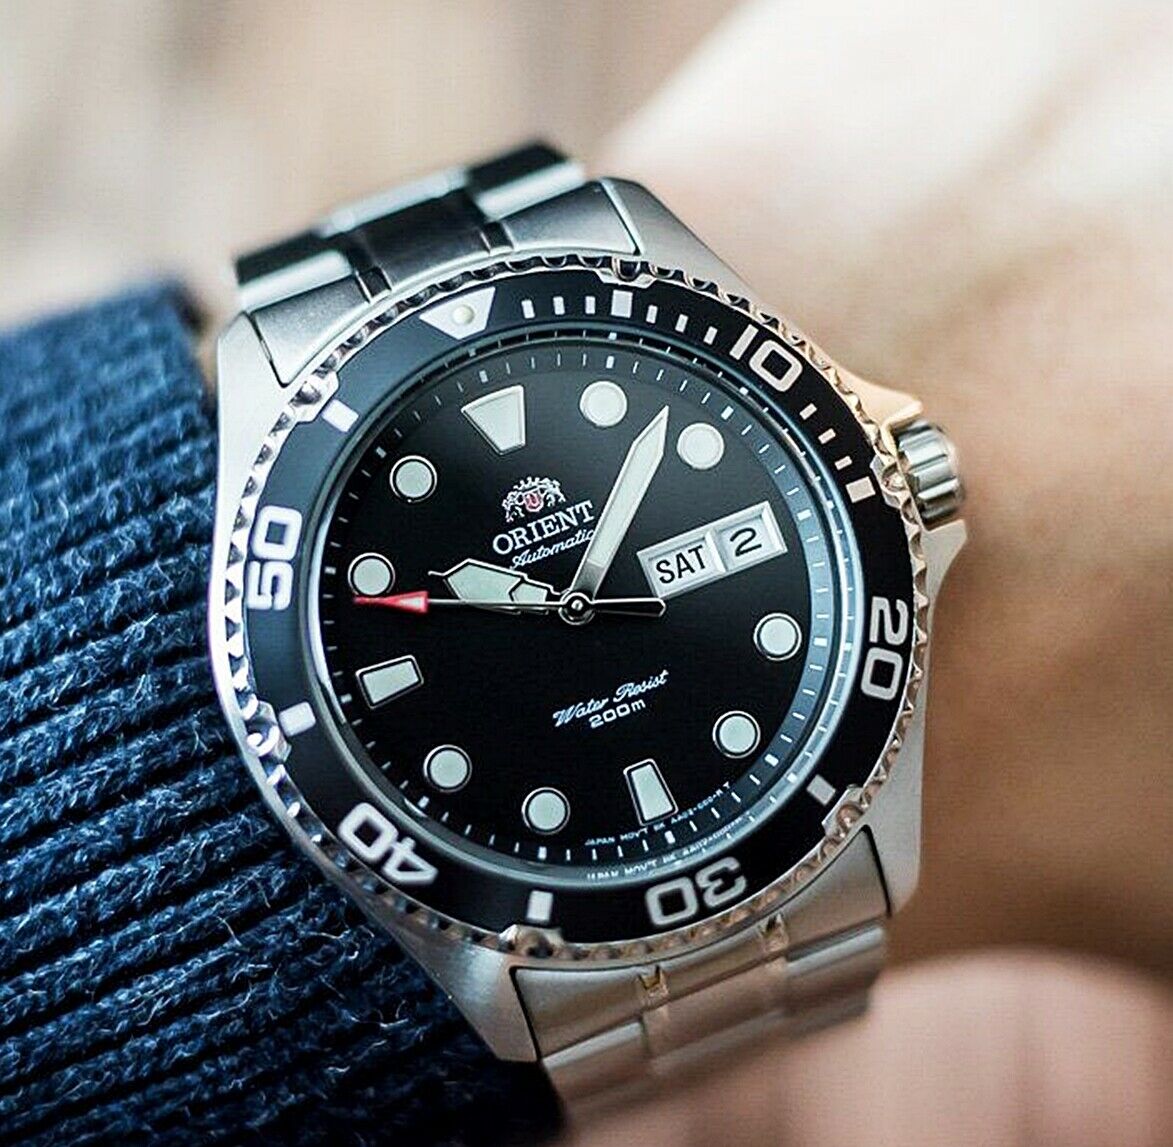 Orient Ray II Automatic Dive Watch on the wrist